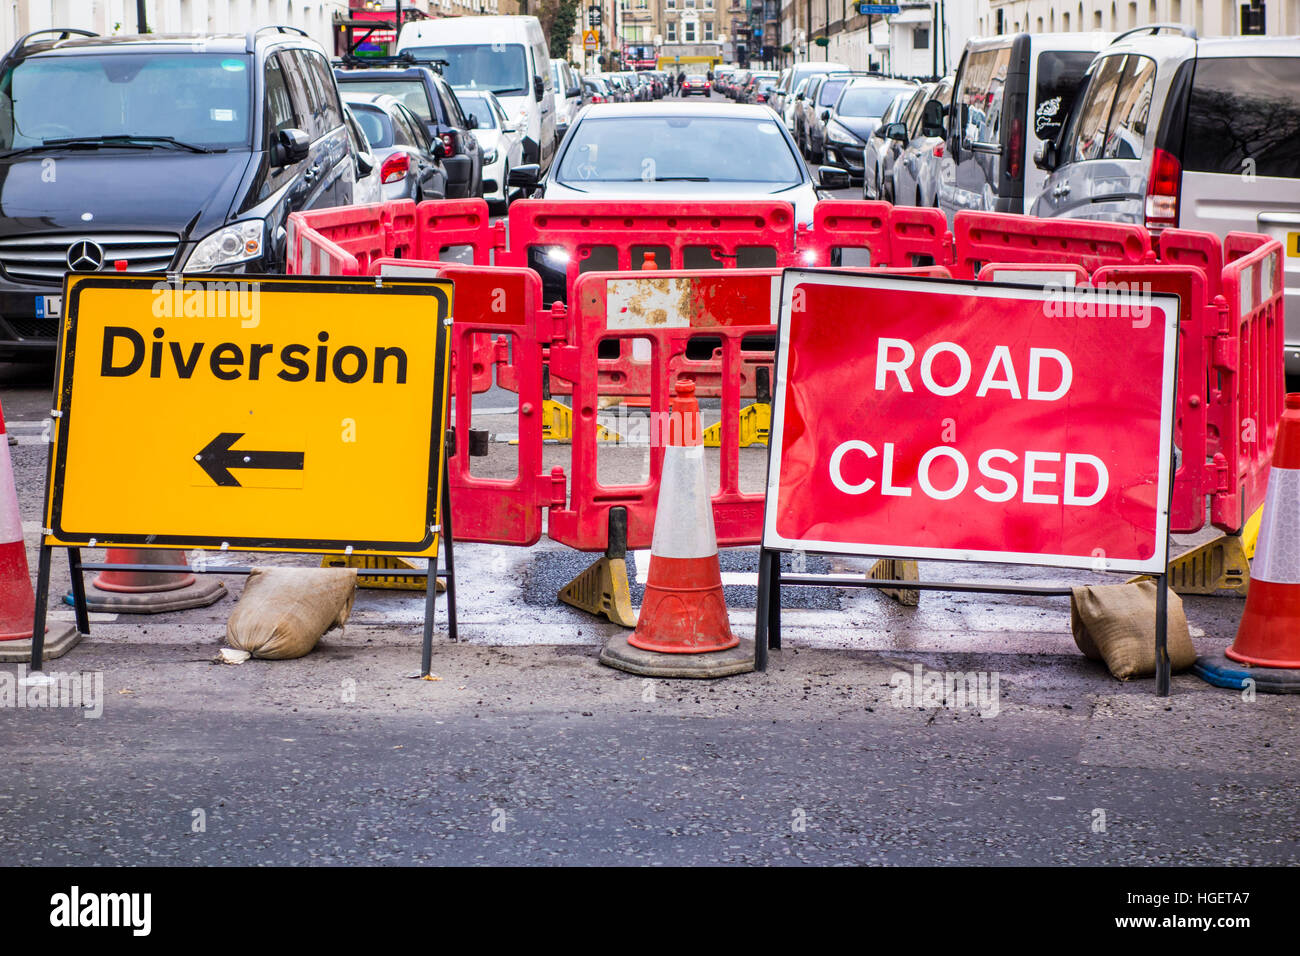 London street diversion and road closed signs Stock Photo